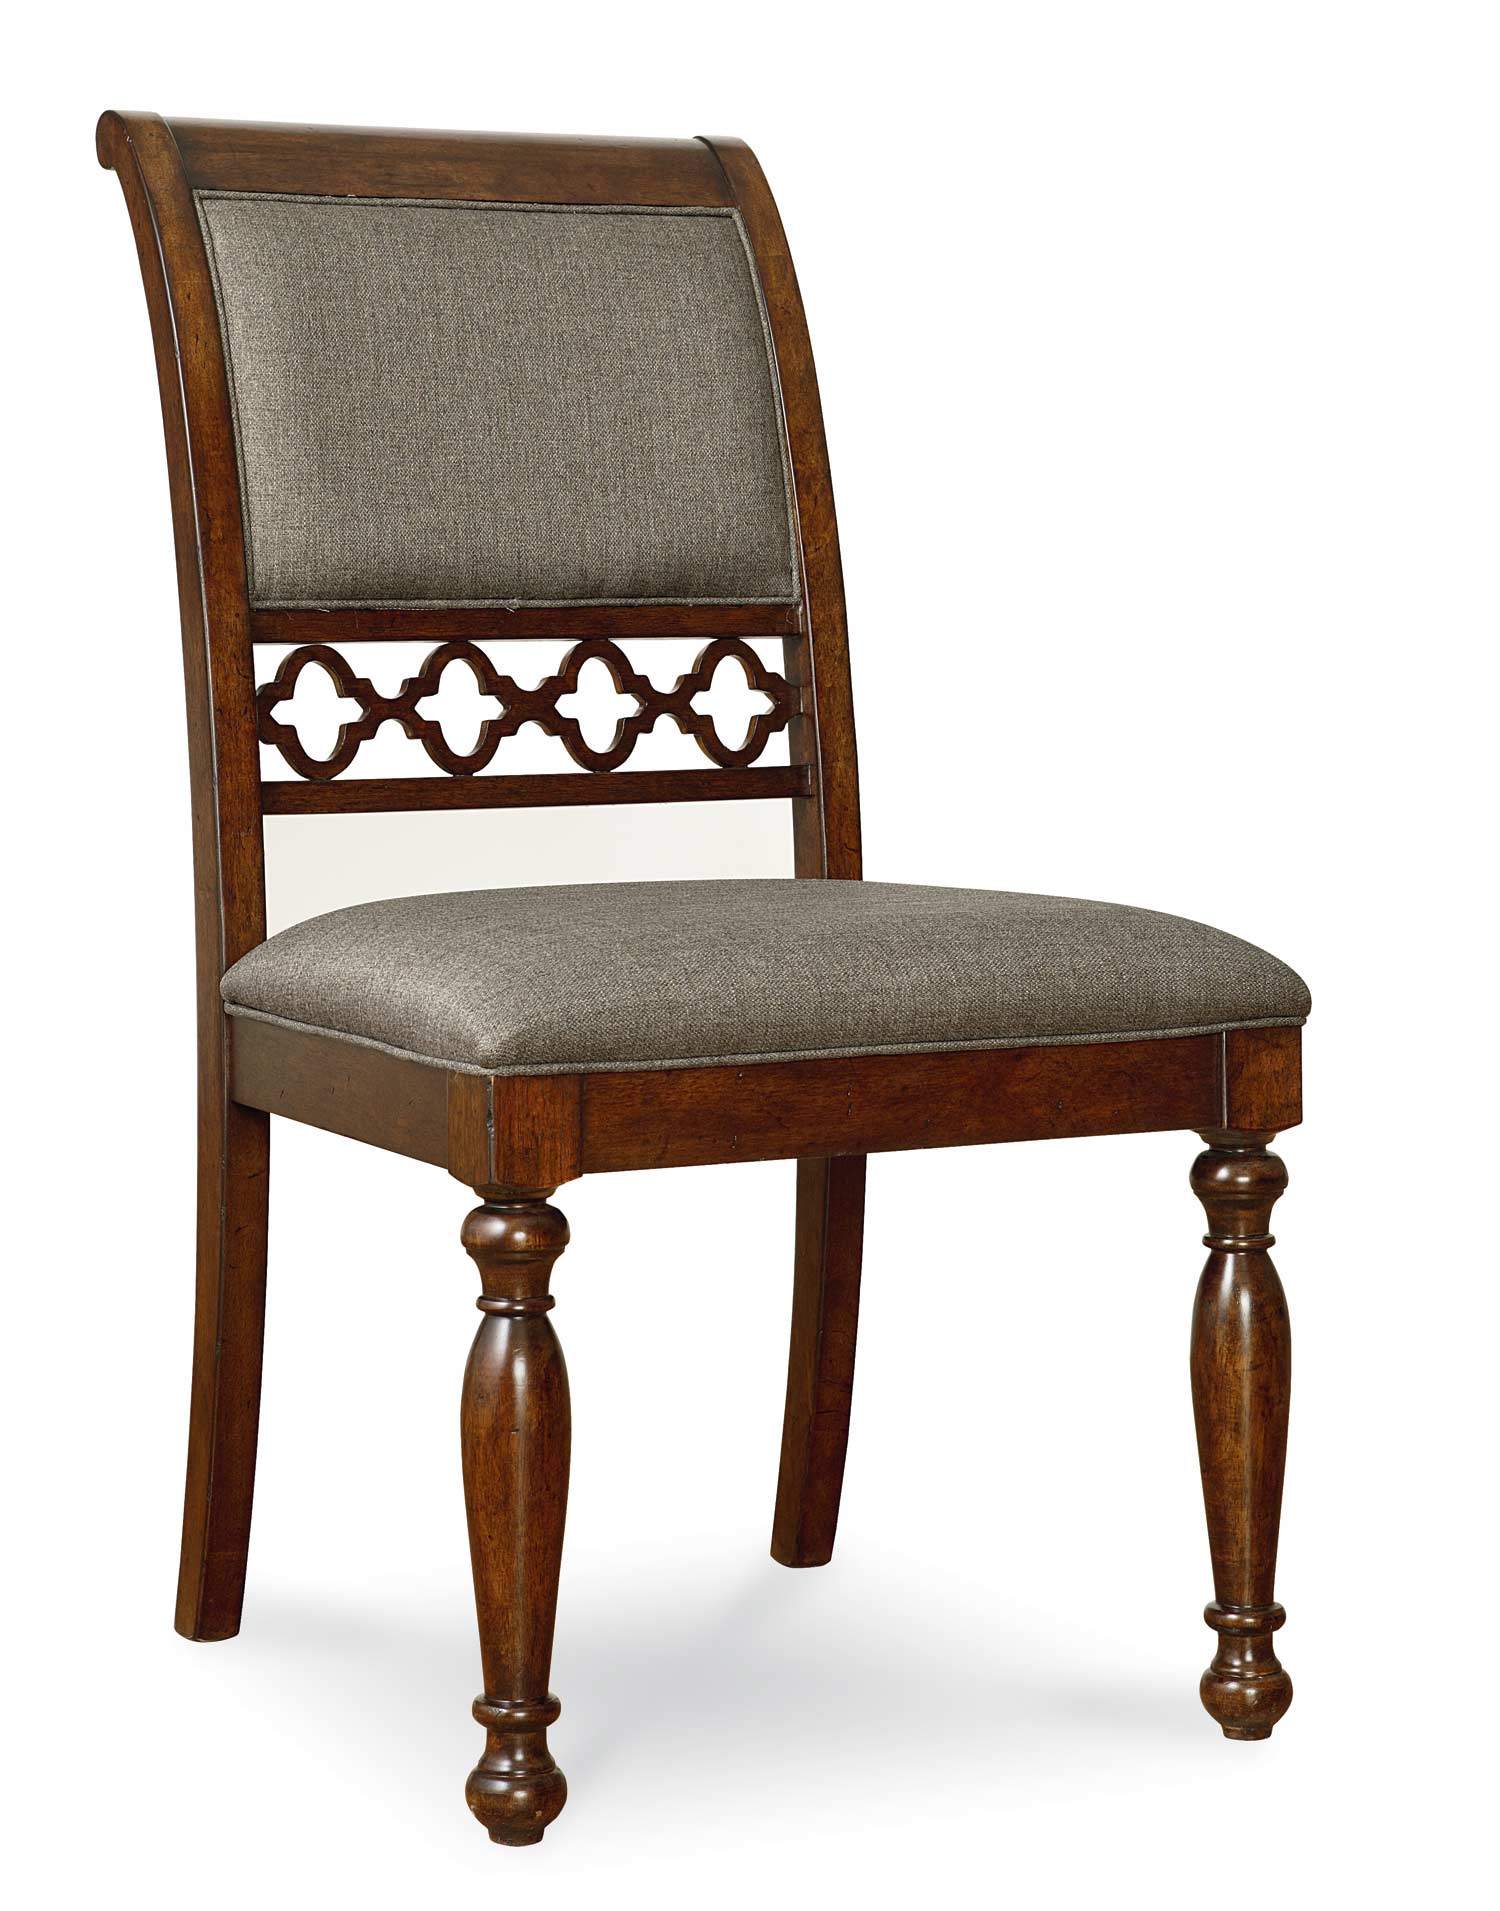 Legacy Classic Thornhill Upholstered Side Chair - Cinnamon